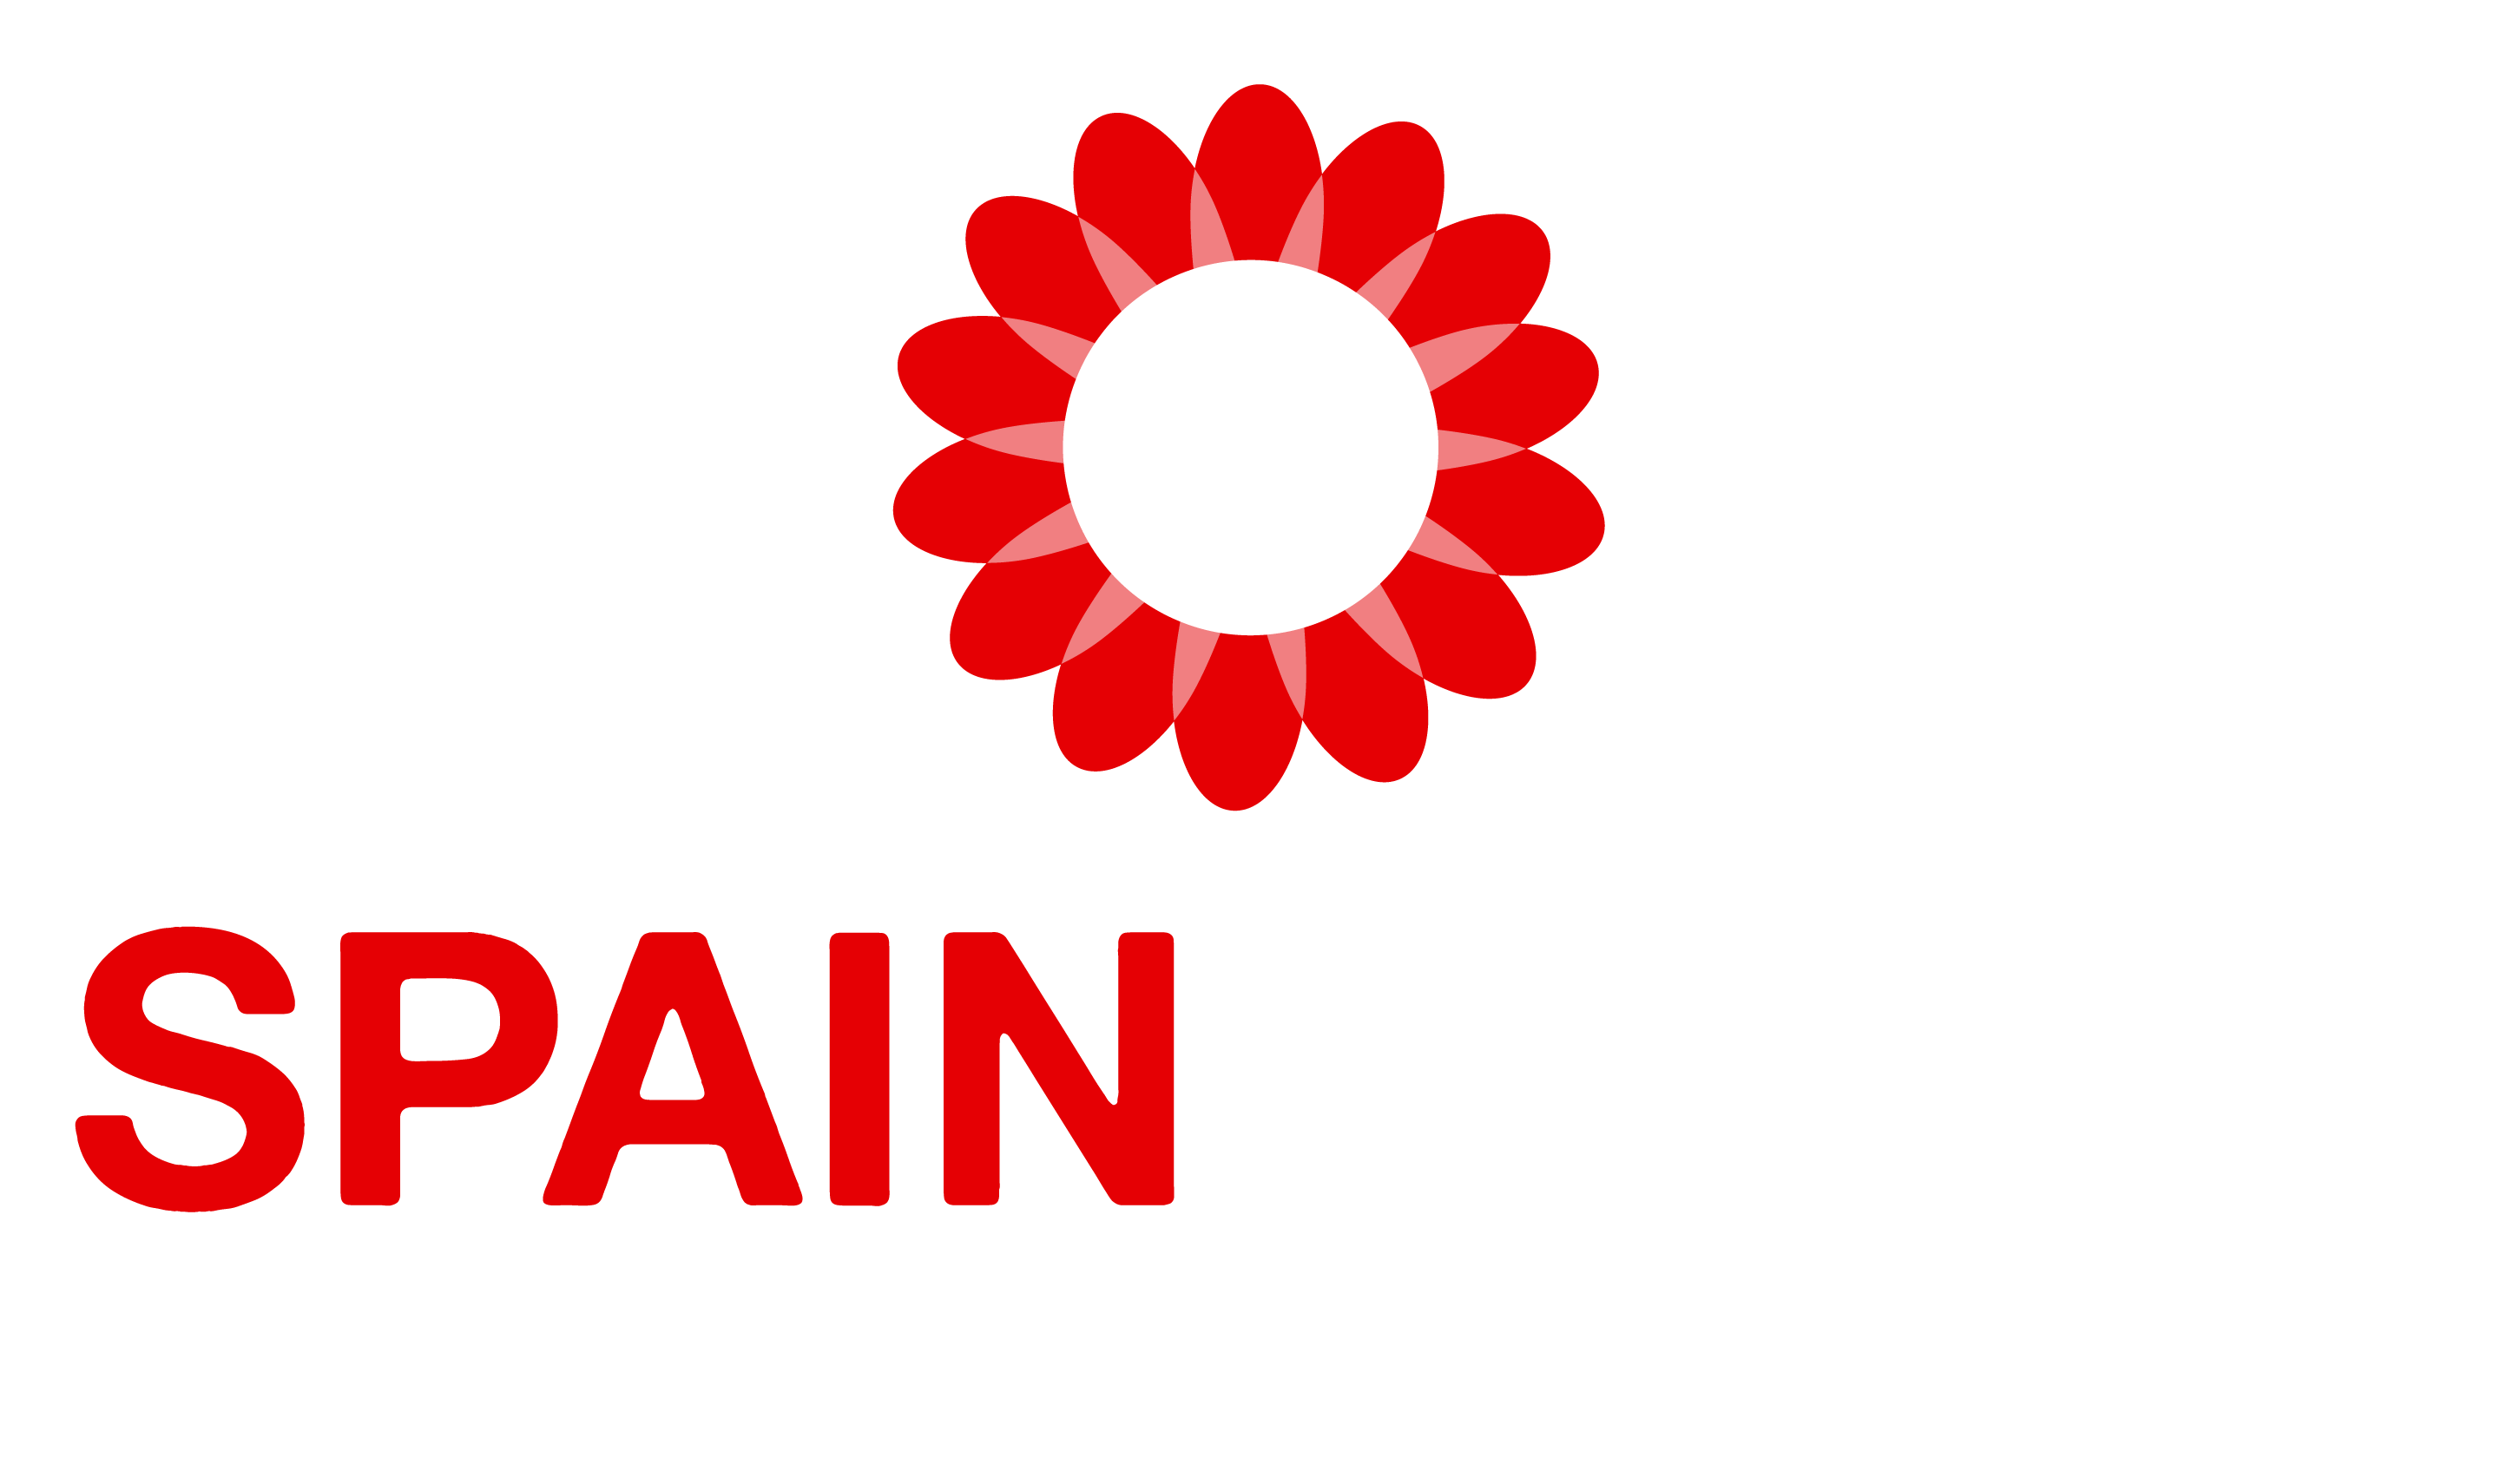 traveling clipart travel spain